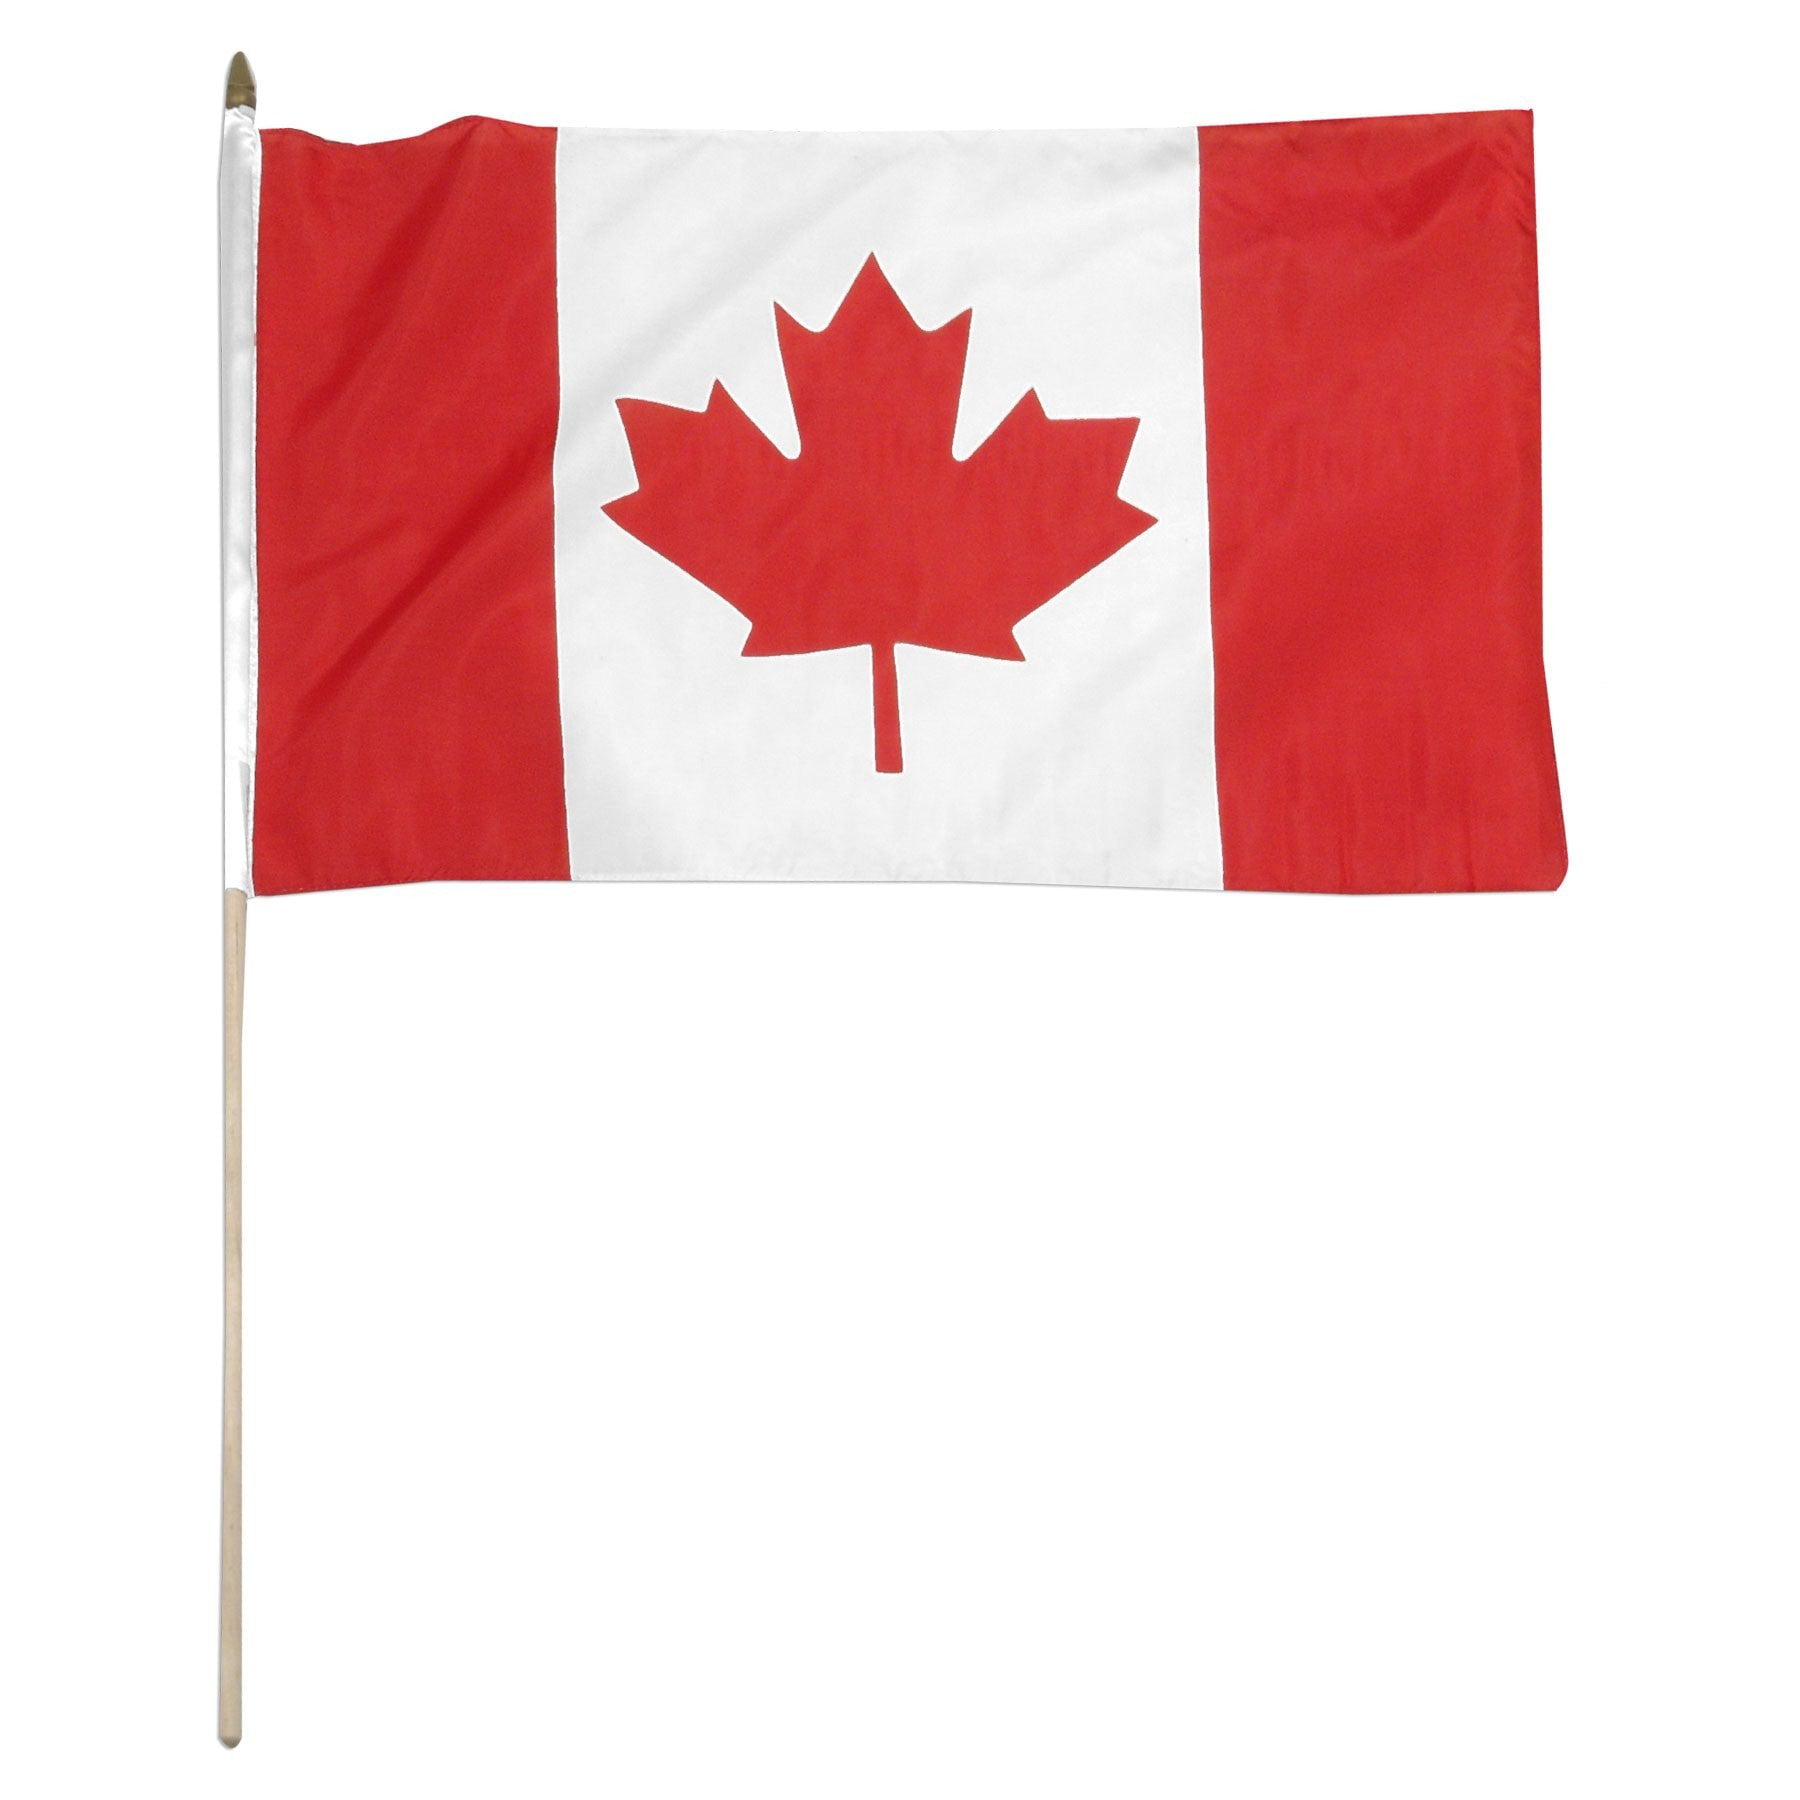 8x12 ft Embroidered Sewn Canada Canadian Nylon Flag 8'x12' grommets 